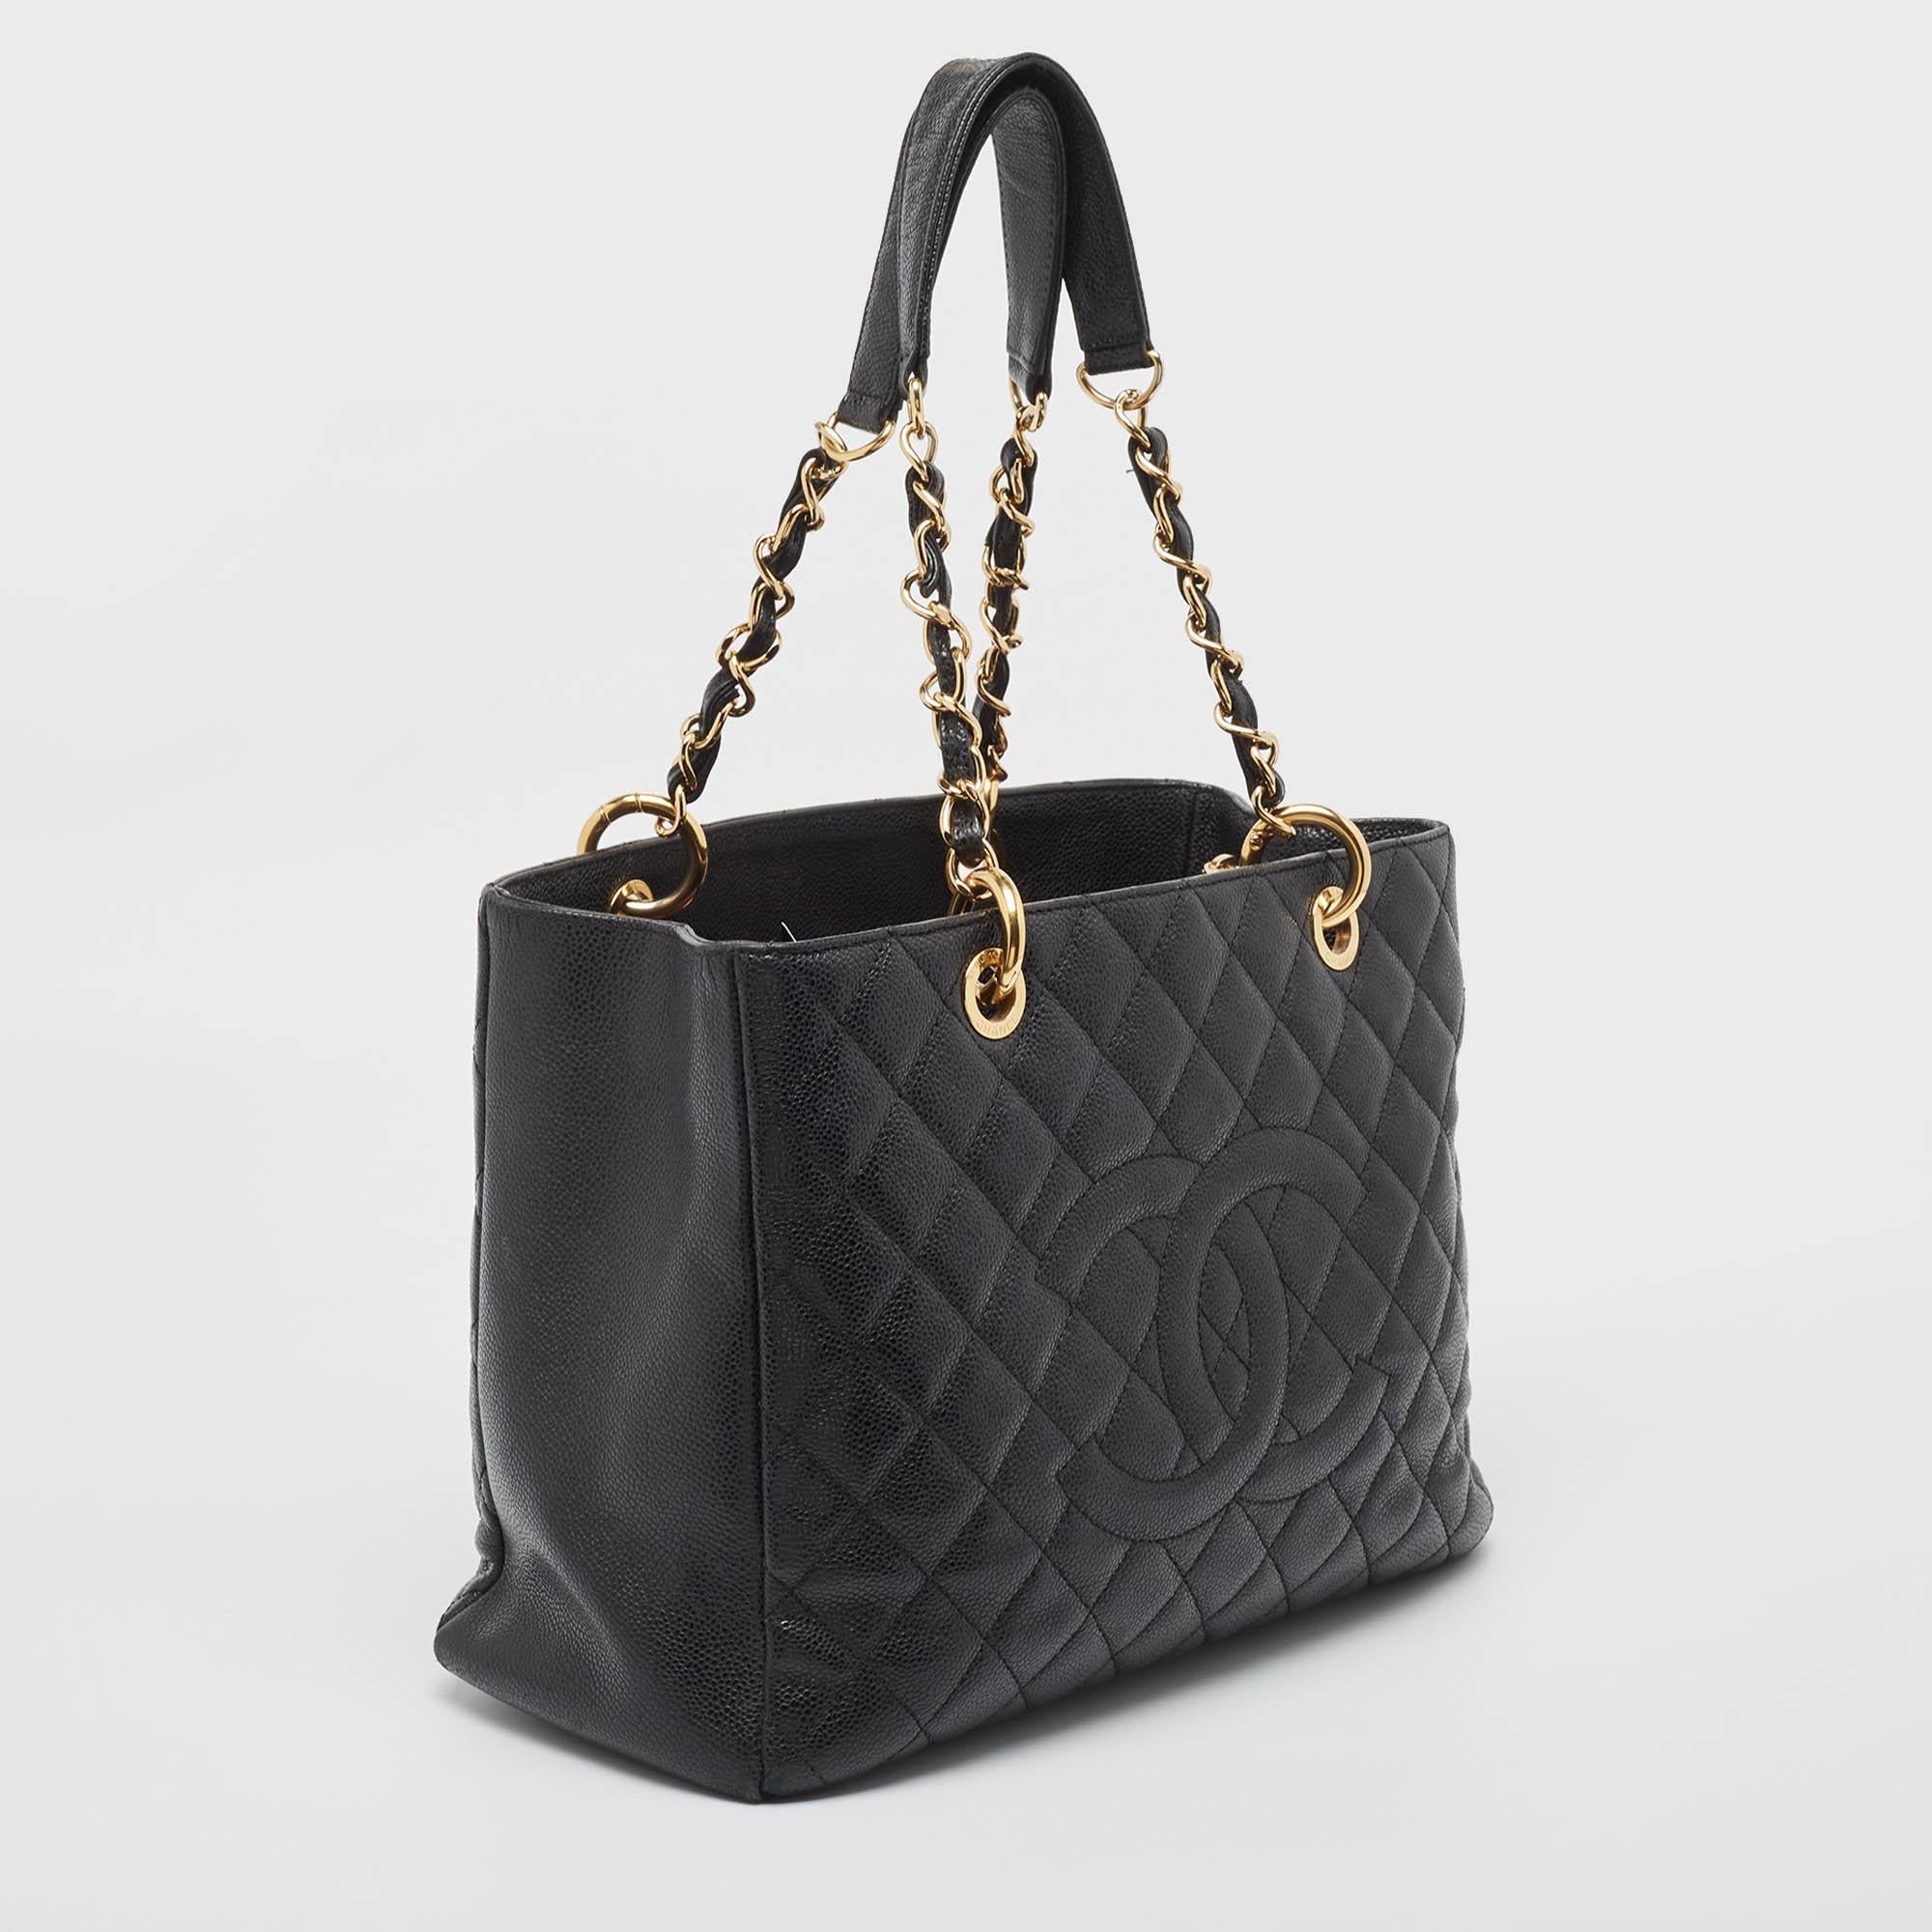 Women's Chanel Black Quilted Caviar Leather GST Shopper Tote